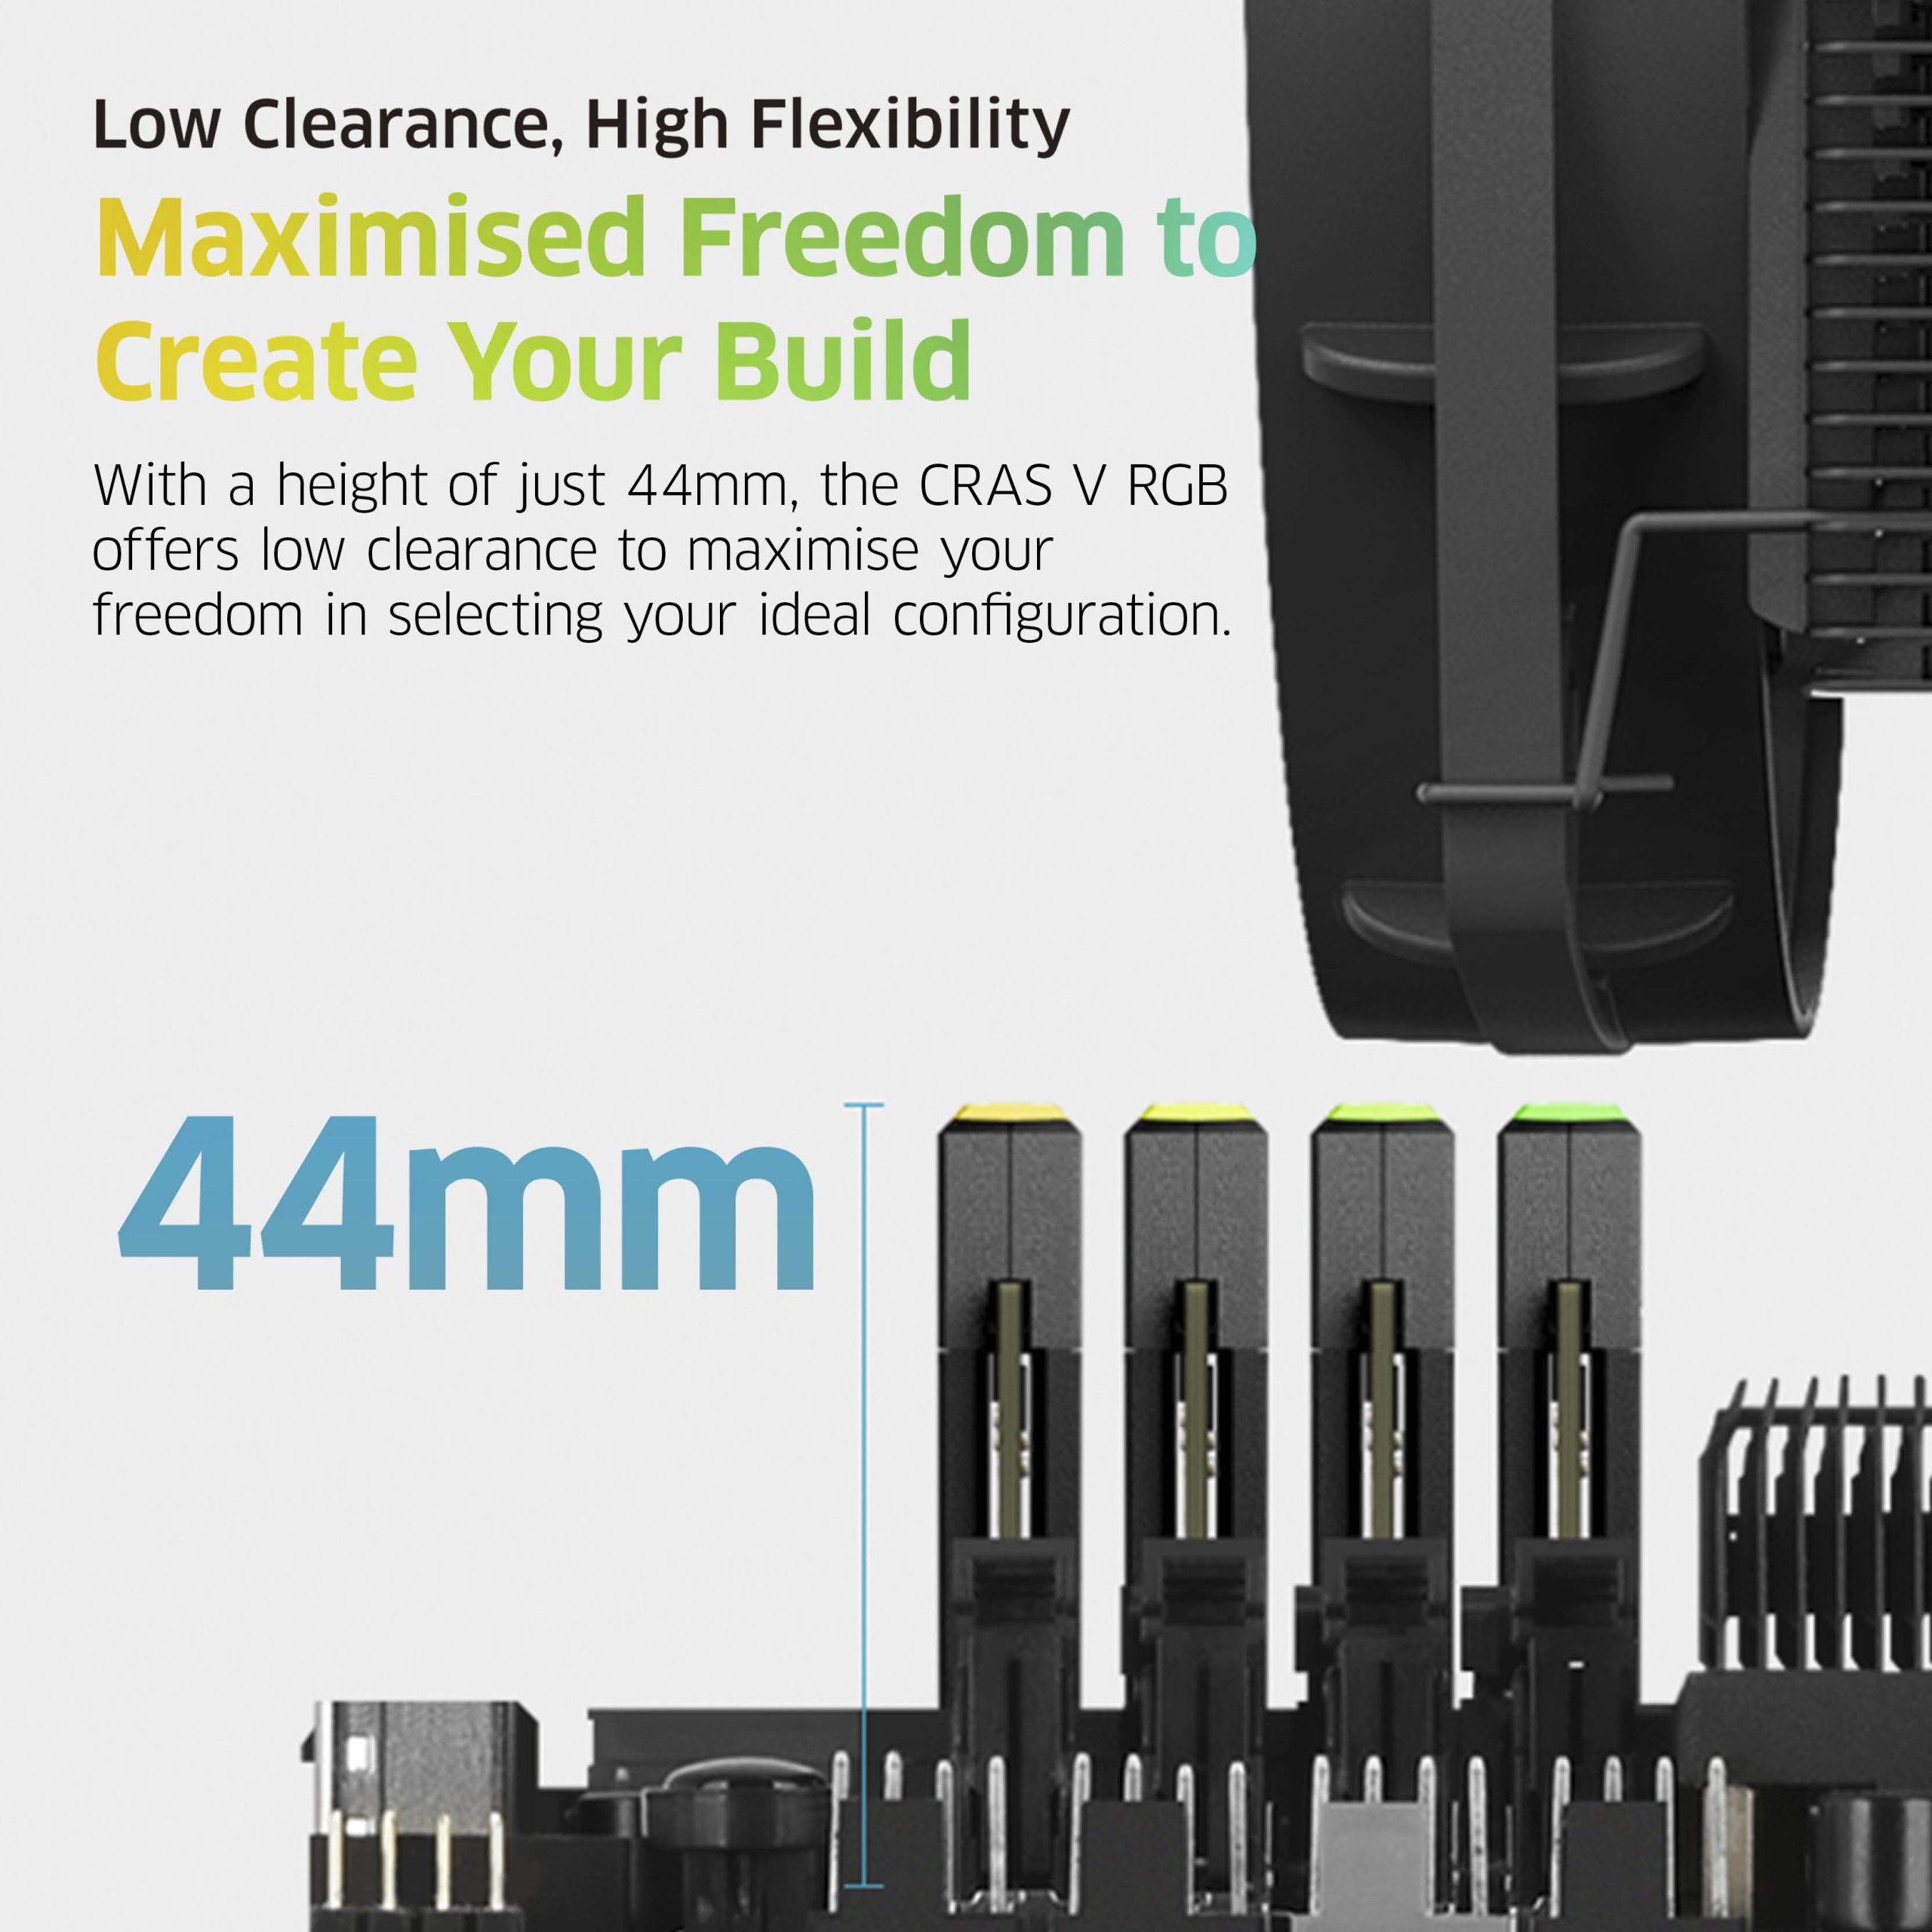 KLEVV CRAS V RGB DDR5 RAM Low Clearance and High Flexibility of 44mm, Customise your PC Build